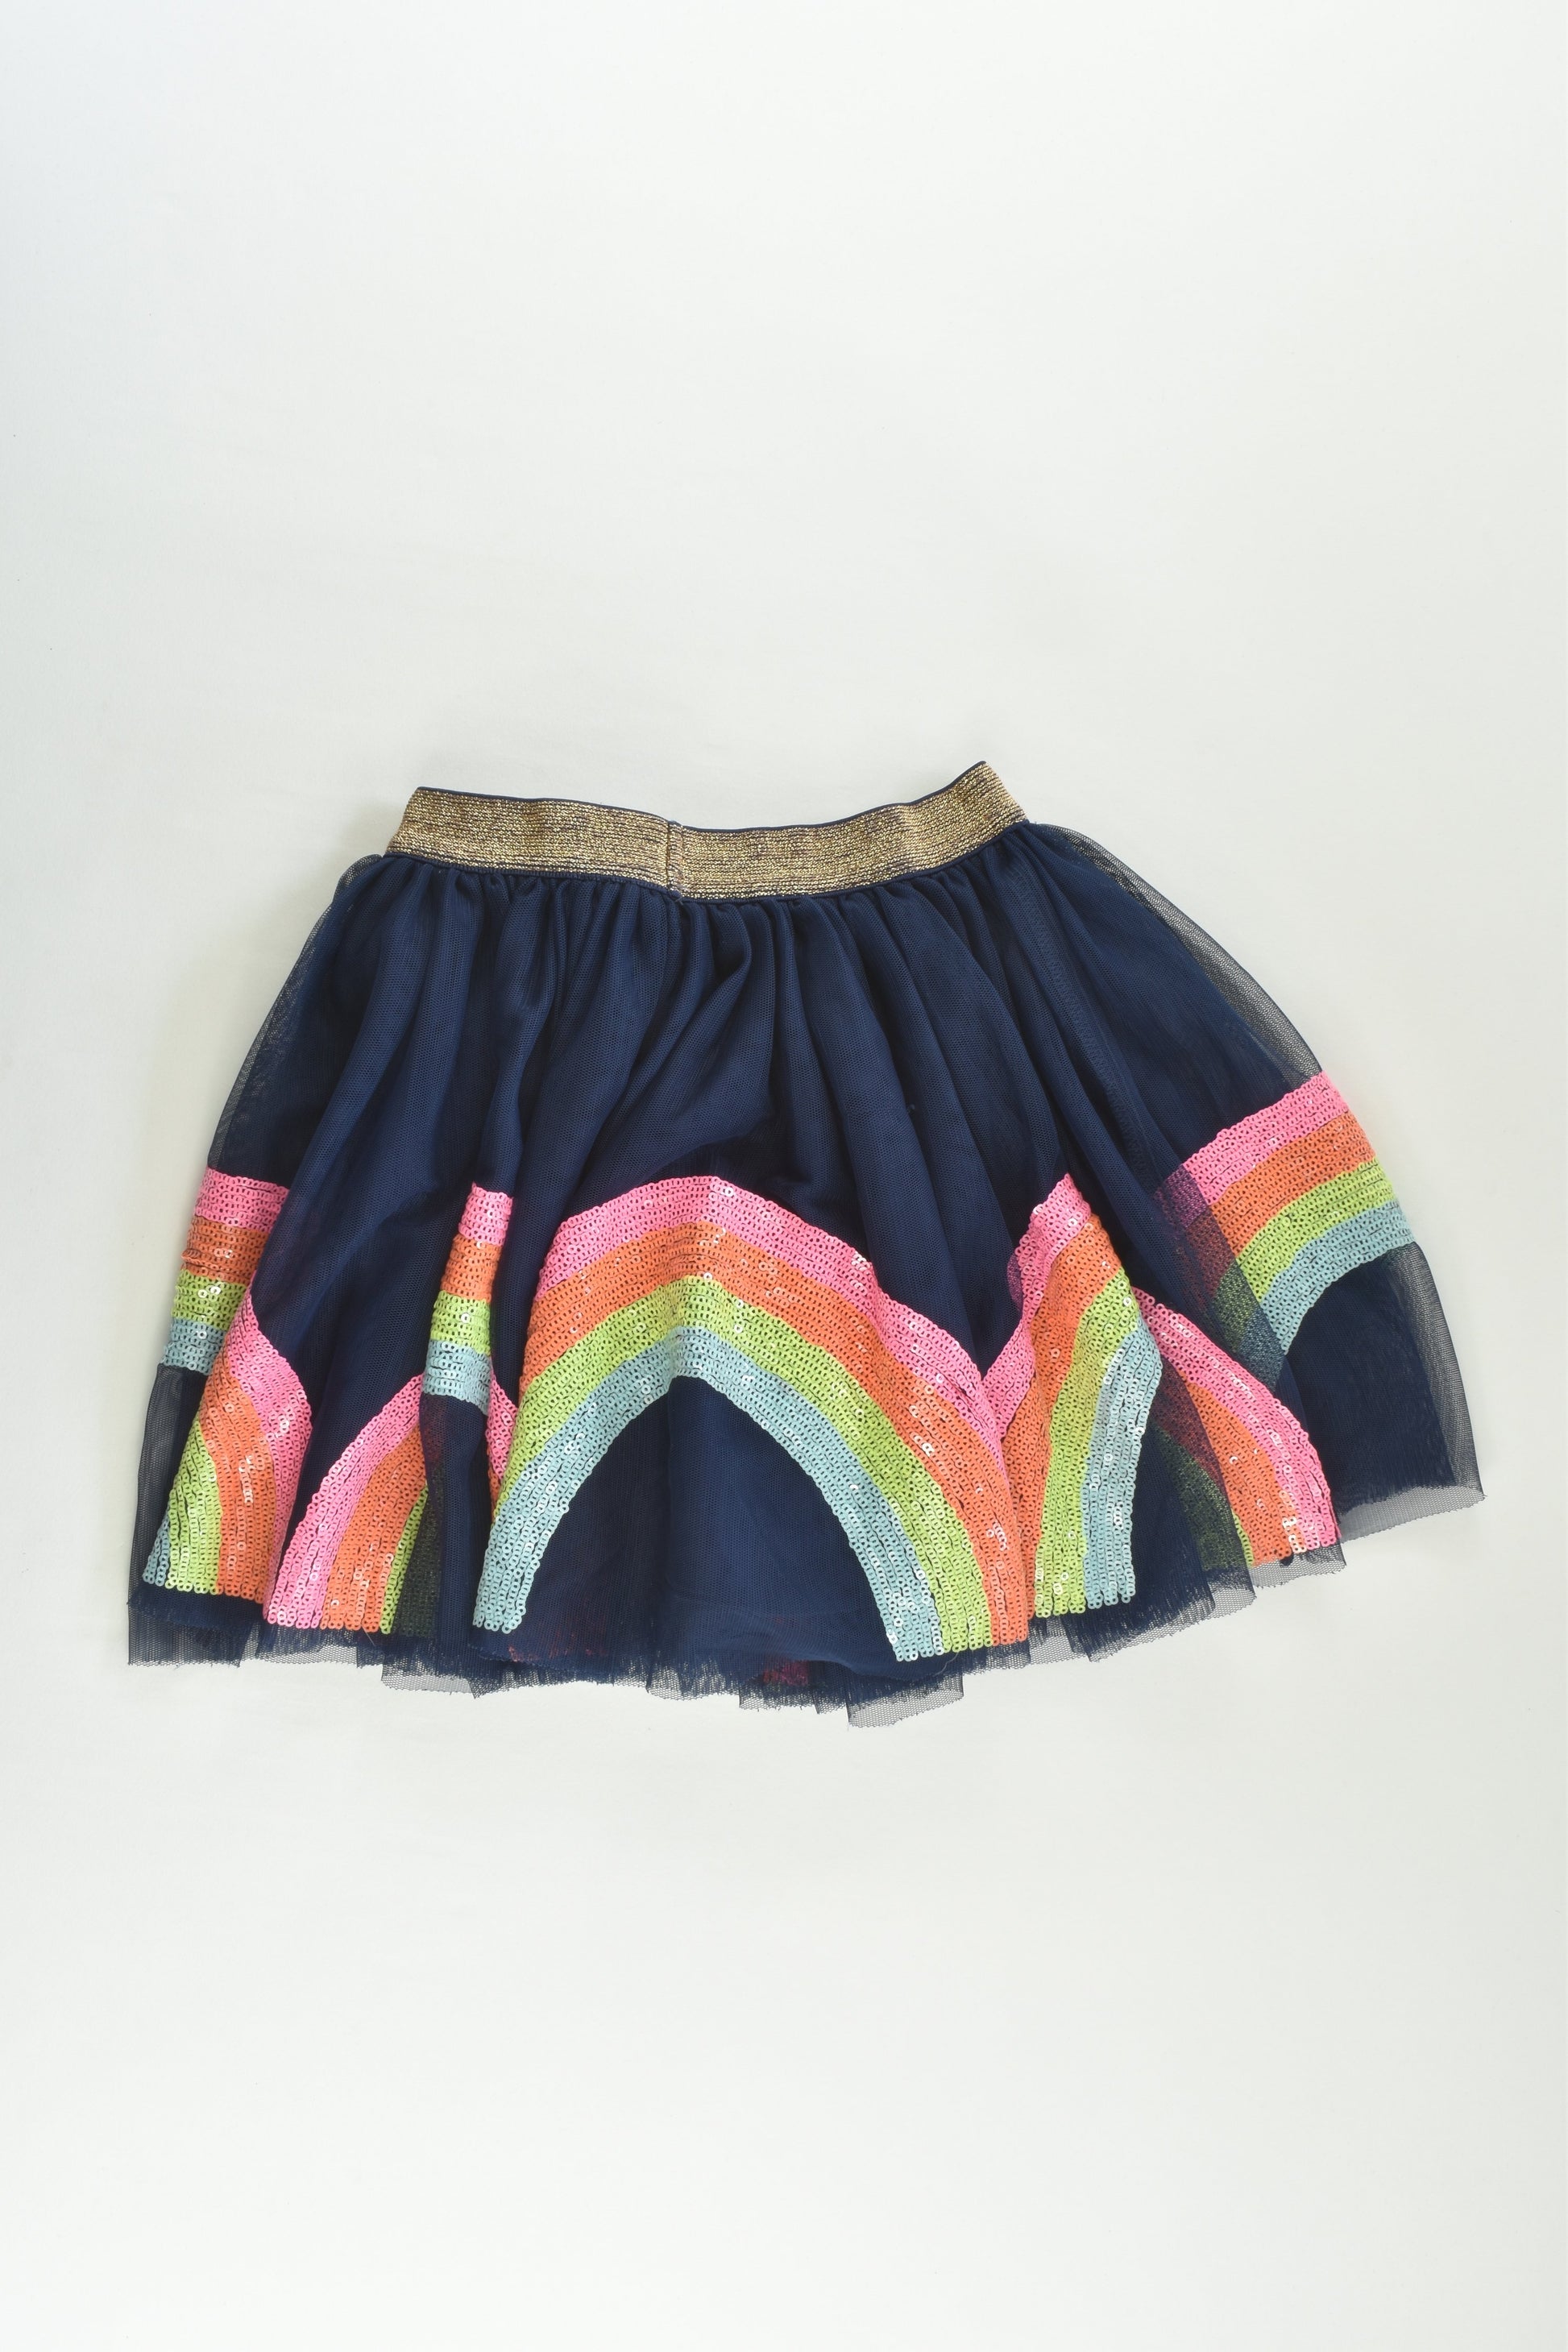 Target Size 5 Lined Rainbow Tulle Skirt